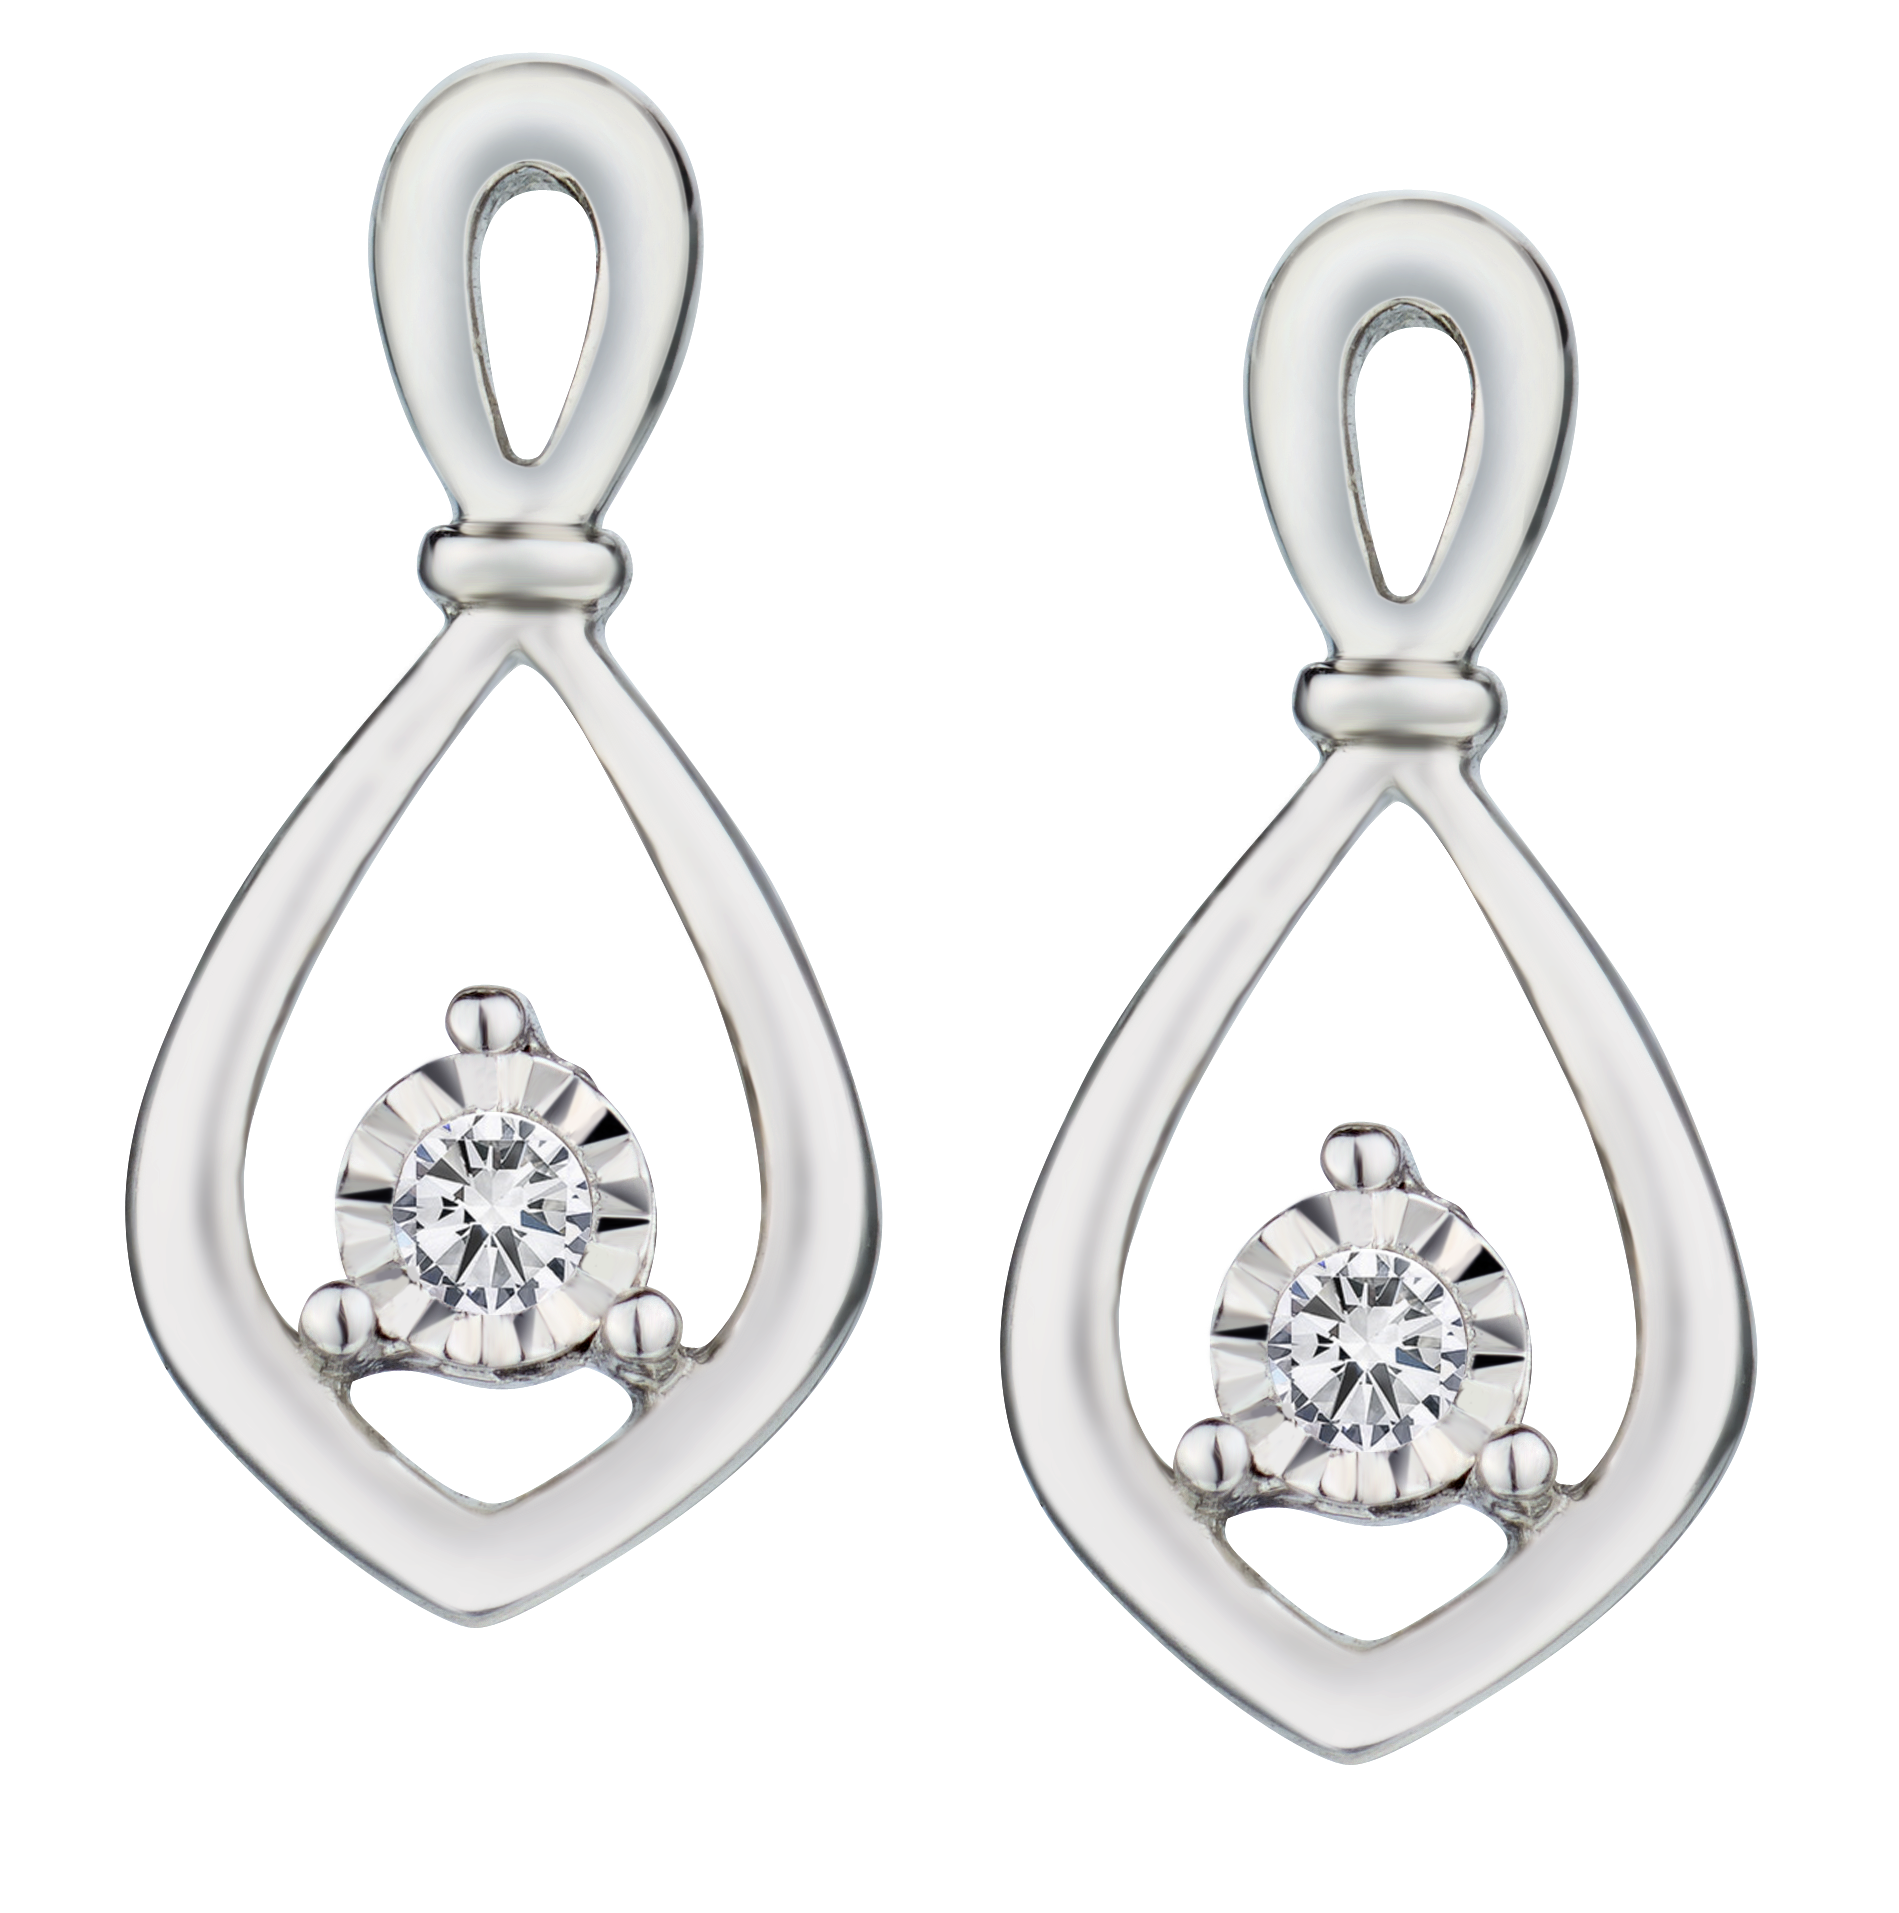 .06 Carat of Lab Grown Diamonds "Miracle" Earrings, Silver.....................NOW